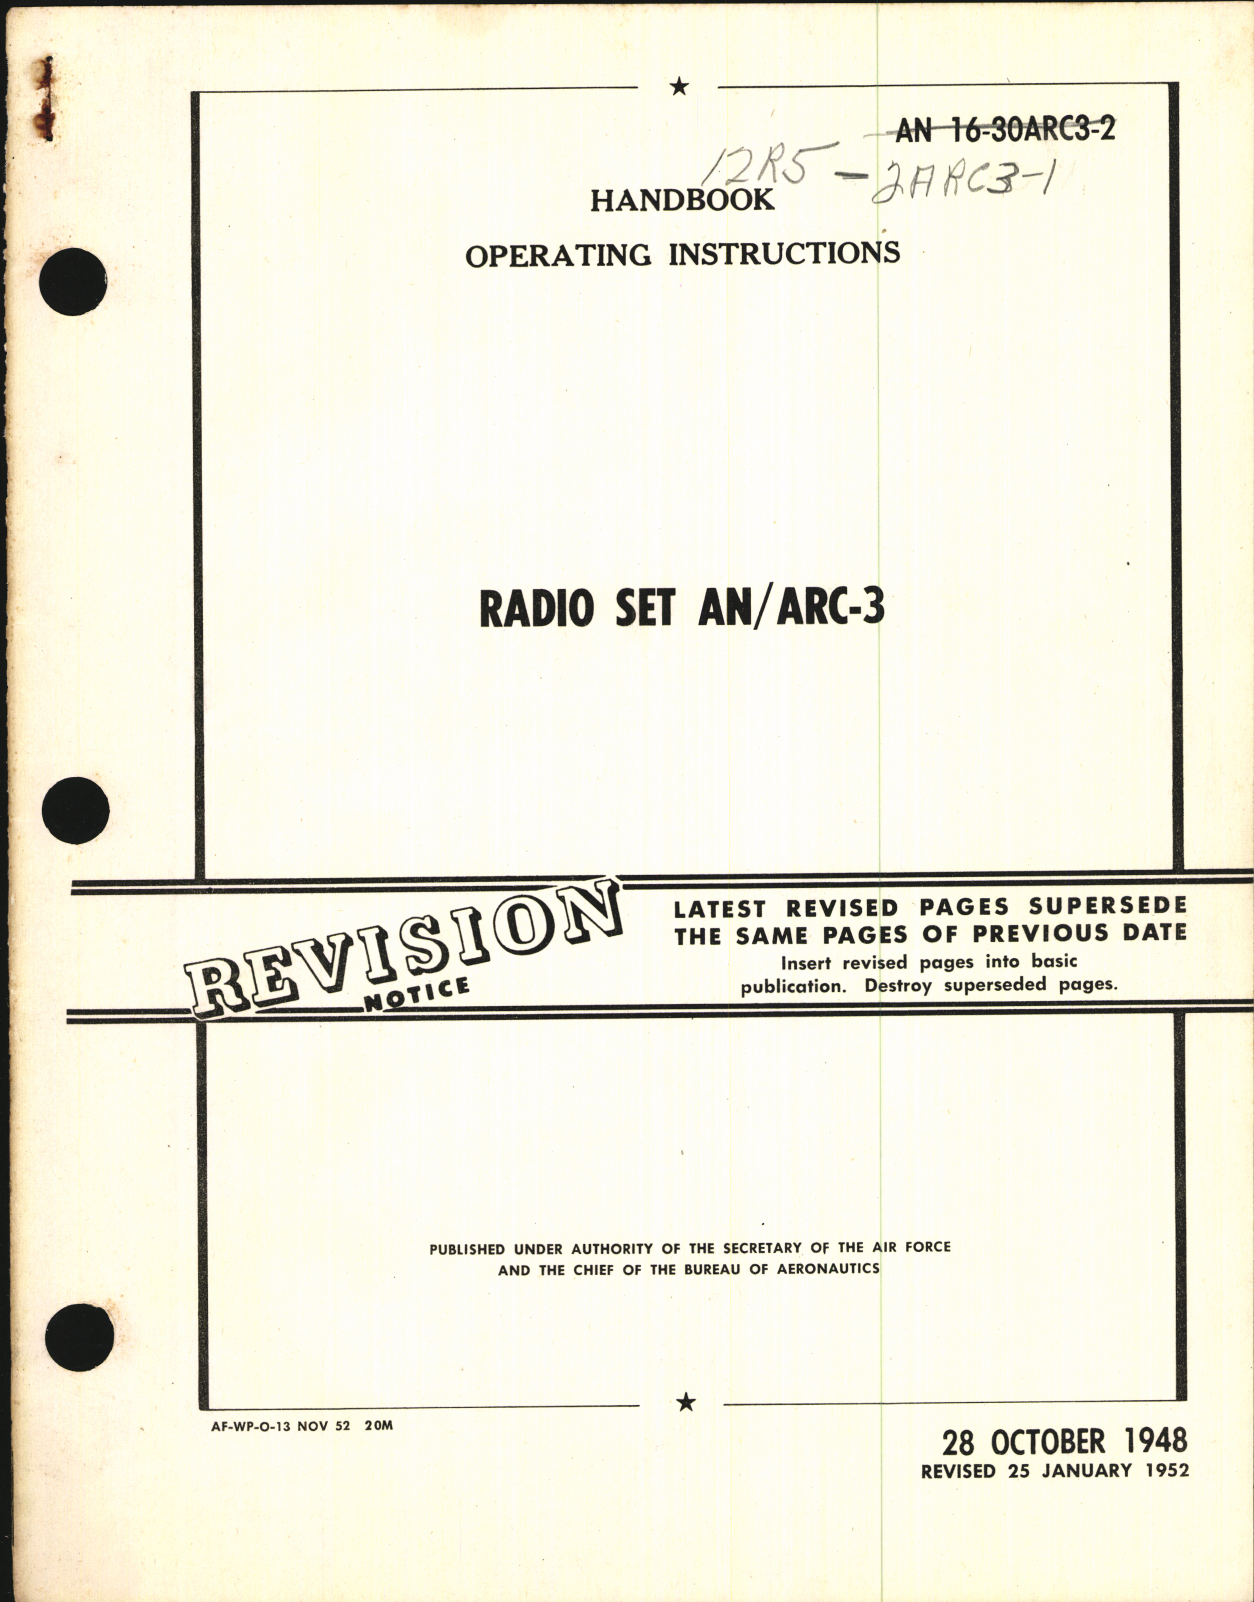 Sample page 1 from AirCorps Library document: Operating Instructions for Radio Set AN/ARC-3